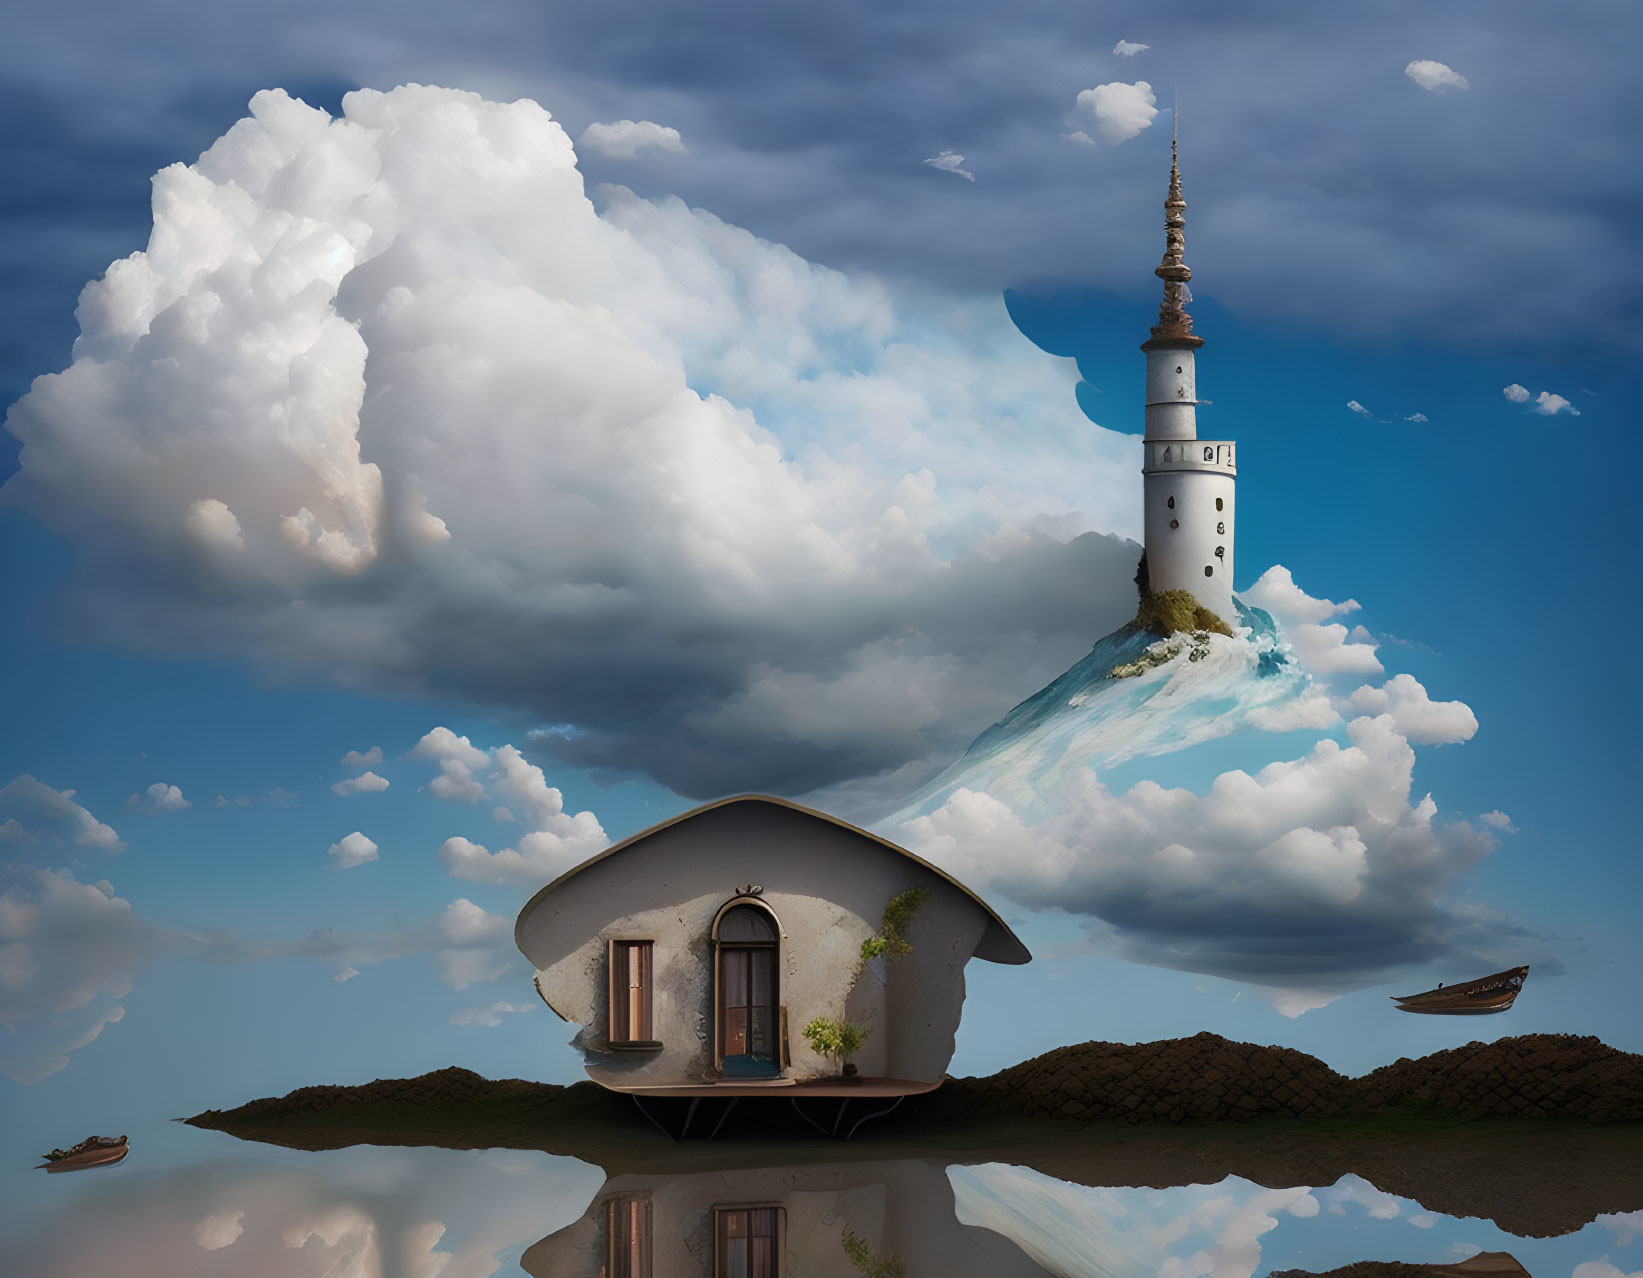 House and lighthouse on floating island with cloudy sky and boats in surreal scene